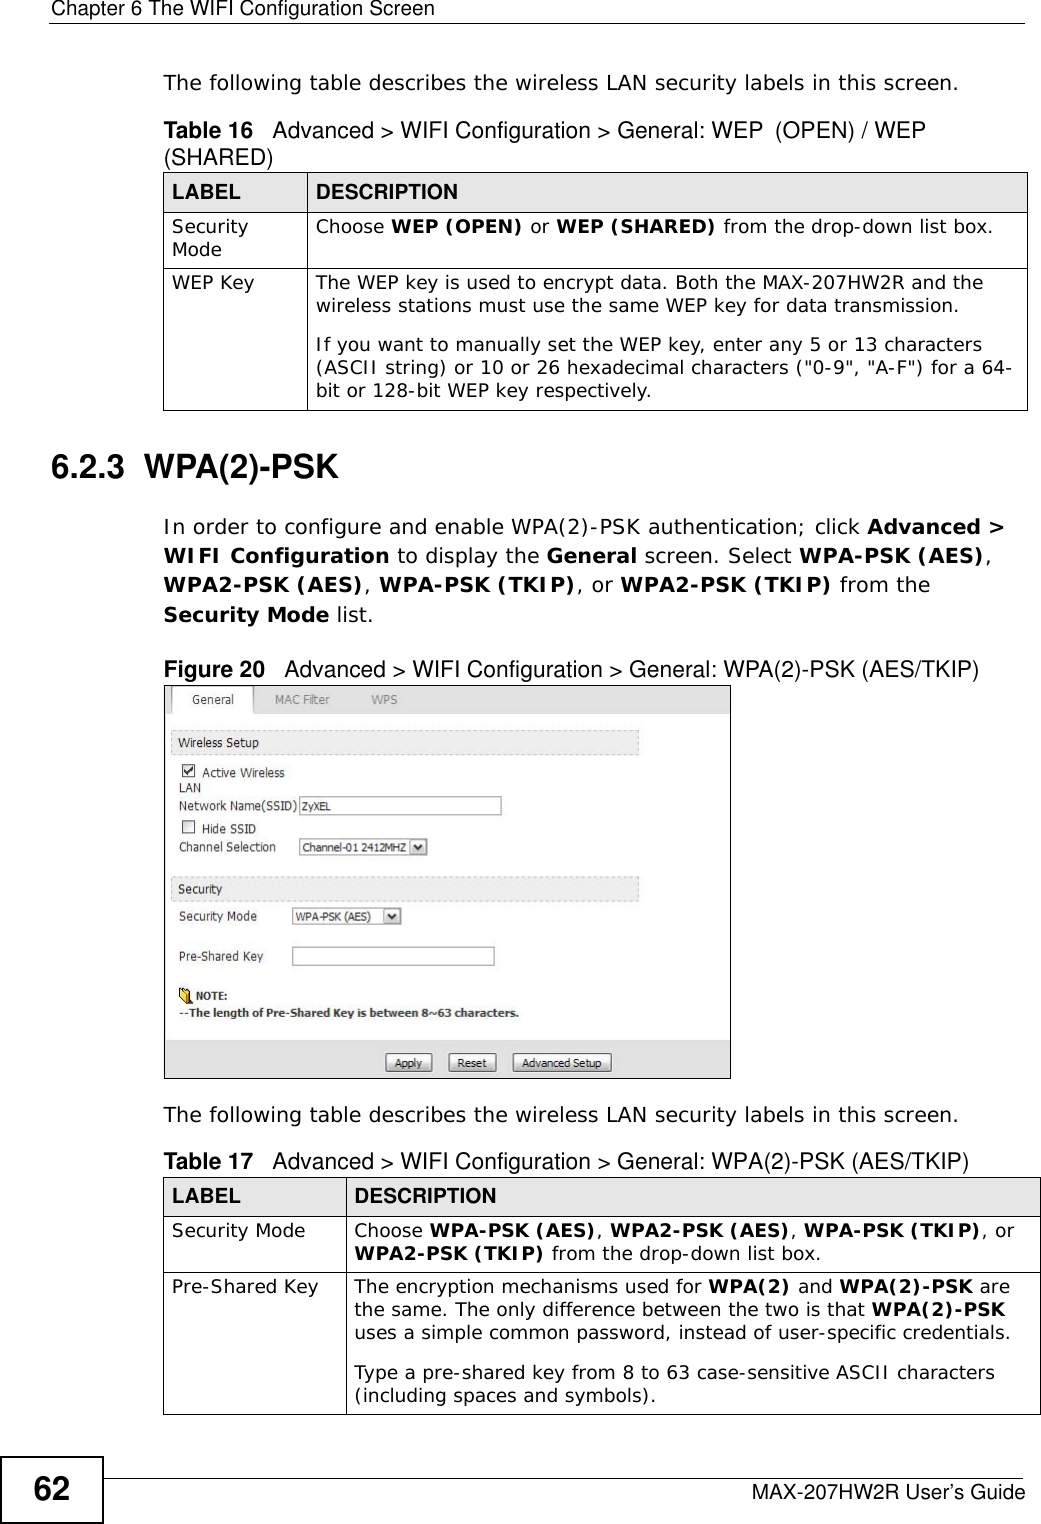 Chapter 6 The WIFI Configuration ScreenMAX-207HW2R User’s Guide62The following table describes the wireless LAN security labels in this screen.6.2.3  WPA(2)-PSK In order to configure and enable WPA(2)-PSK authentication; click Advanced &gt; WIFI Configuration to display the General screen. Select WPA-PSK (AES), WPA2-PSK (AES), WPA-PSK (TKIP), or WPA2-PSK (TKIP) from the Security Mode list.Figure 20   Advanced &gt; WIFI Configuration &gt; General: WPA(2)-PSK (AES/TKIP)The following table describes the wireless LAN security labels in this screen.Table 16   Advanced &gt; WIFI Configuration &gt; General: WEP (OPEN) / WEP (SHARED)LABEL DESCRIPTIONSecurity Mode  Choose WEP (OPEN) or WEP (SHARED) from the drop-down list box.WEP Key The WEP key is used to encrypt data. Both the MAX-207HW2R and the wireless stations must use the same WEP key for data transmission.If you want to manually set the WEP key, enter any 5 or 13 characters (ASCII string) or 10 or 26 hexadecimal characters (&quot;0-9&quot;, &quot;A-F&quot;) for a 64-bit or 128-bit WEP key respectively.Table 17   Advanced &gt; WIFI Configuration &gt; General: WPA(2)-PSK (AES/TKIP)LABEL DESCRIPTIONSecurity Mode Choose WPA-PSK (AES), WPA2-PSK (AES), WPA-PSK (TKIP), or WPA2-PSK (TKIP) from the drop-down list box.Pre-Shared Key The encryption mechanisms used for WPA(2) and WPA(2)-PSK are the same. The only difference between the two is that WPA(2)-PSK uses a simple common password, instead of user-specific credentials.Type a pre-shared key from 8 to 63 case-sensitive ASCII characters (including spaces and symbols).